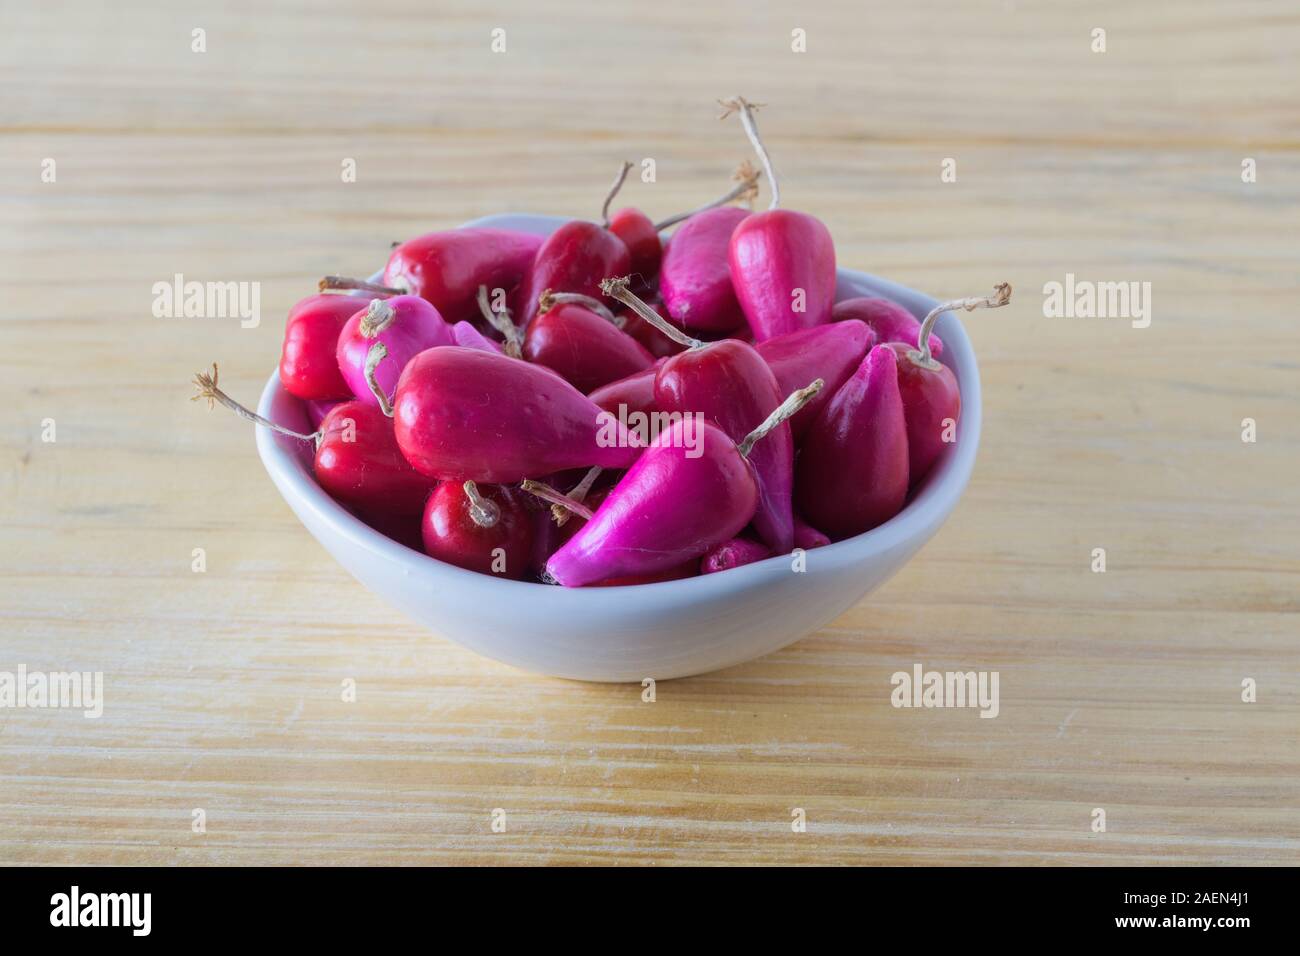 Fresh Pitiguey fruit group in white bowl on wood table Stock Photo